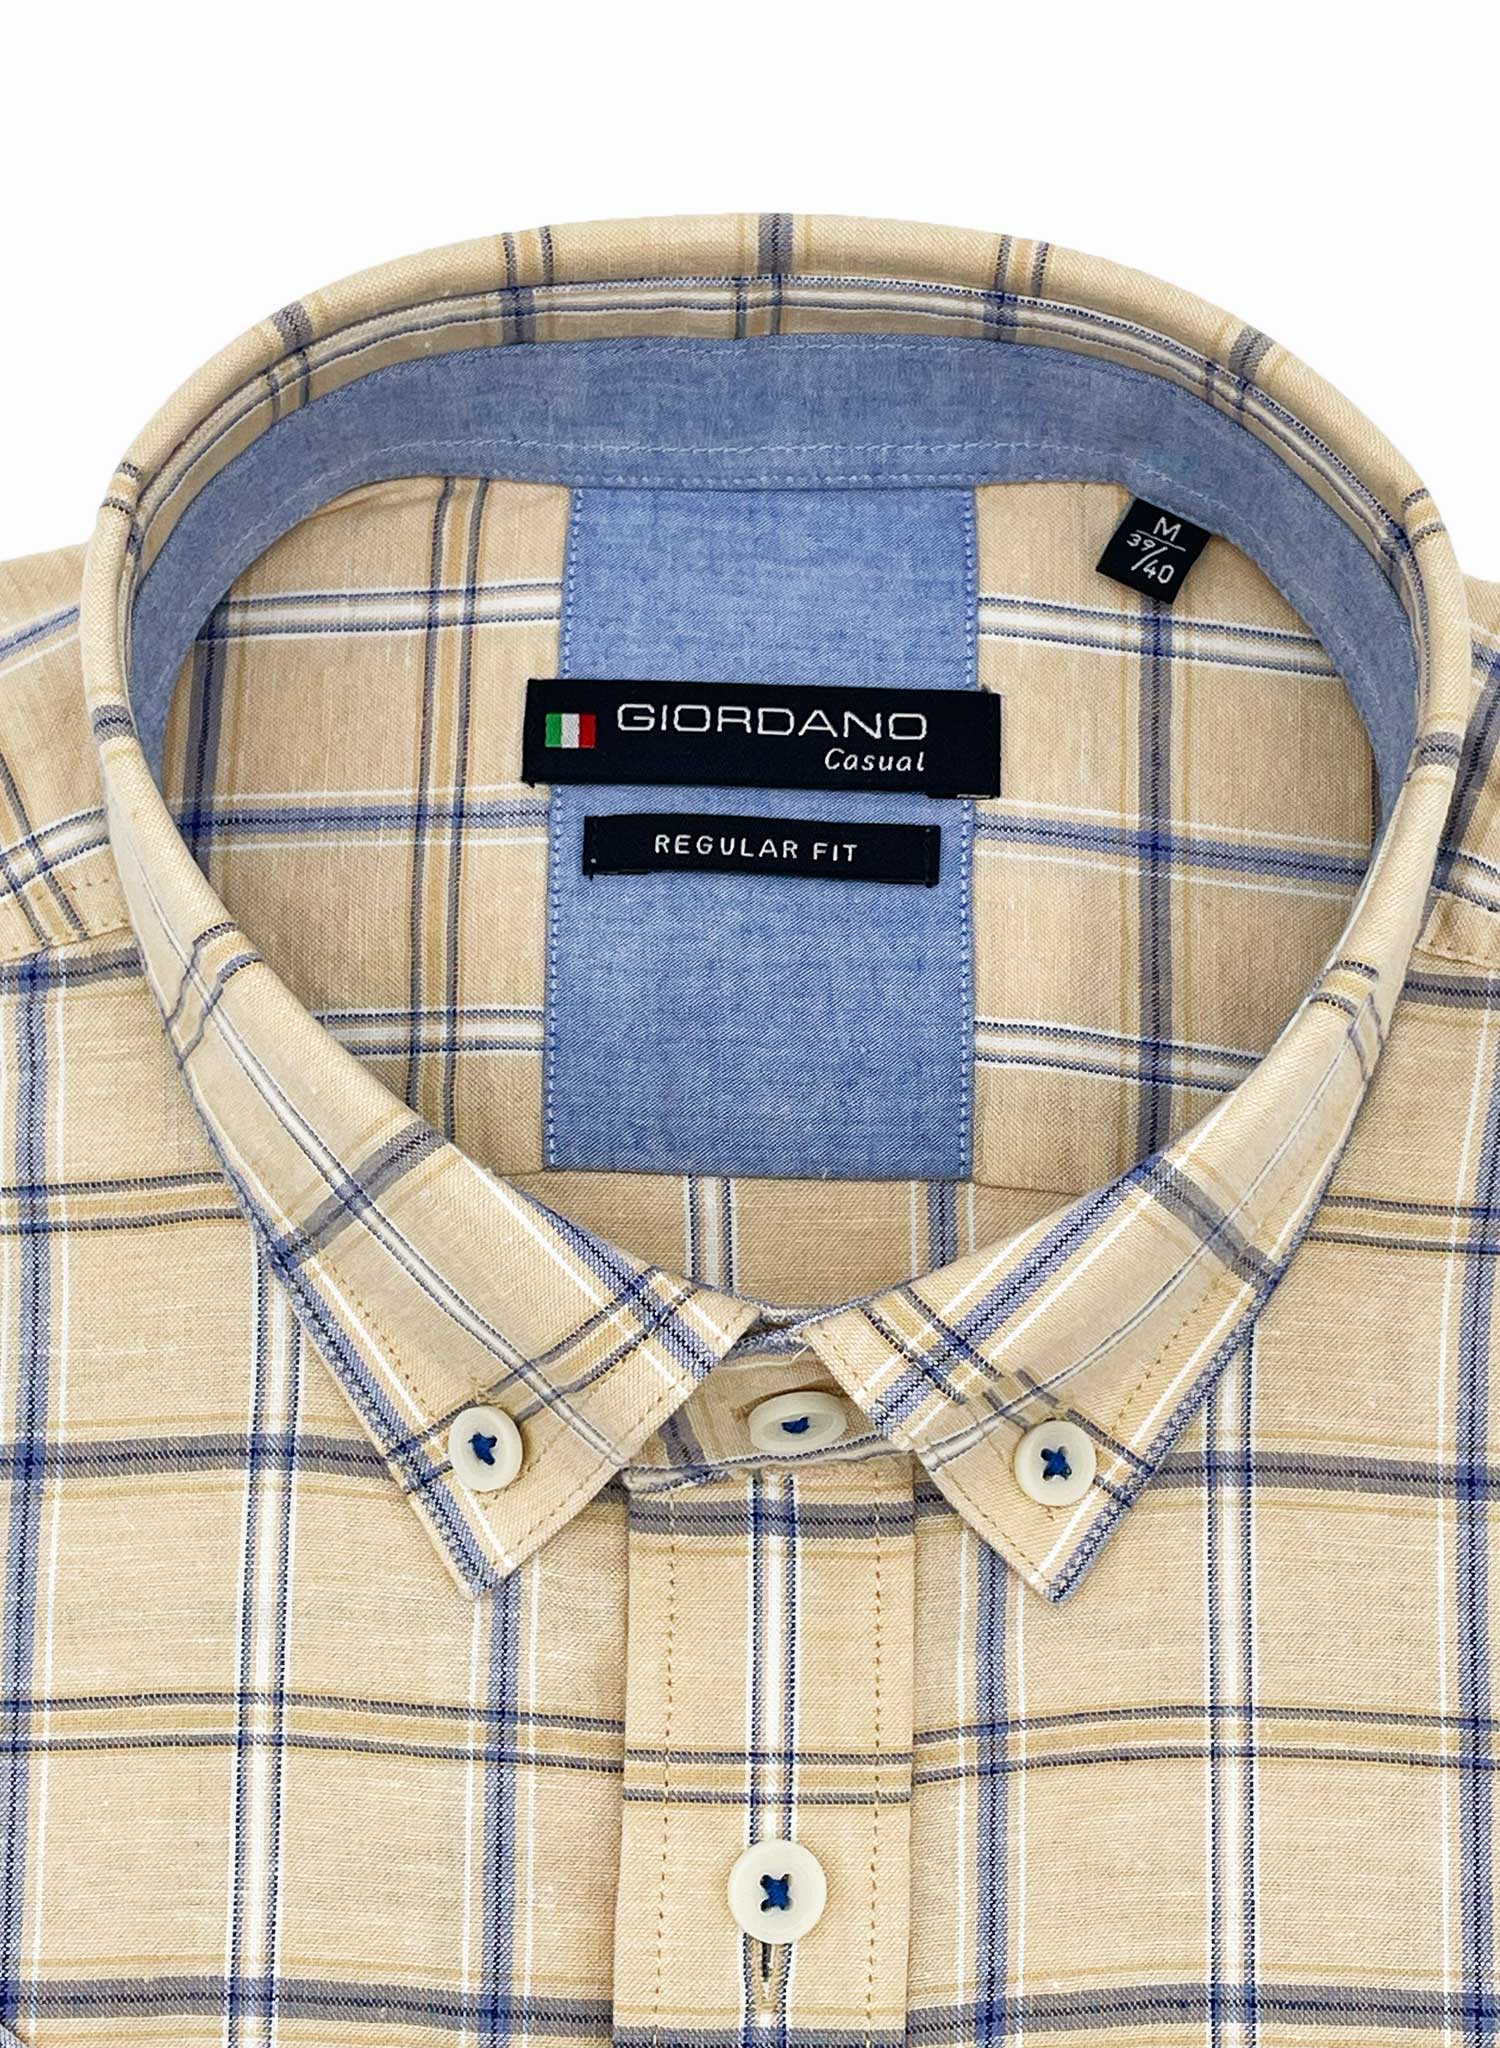 Giordano Beige Check Linen Short Sleeve Shirt cropped to show collar and blue trim